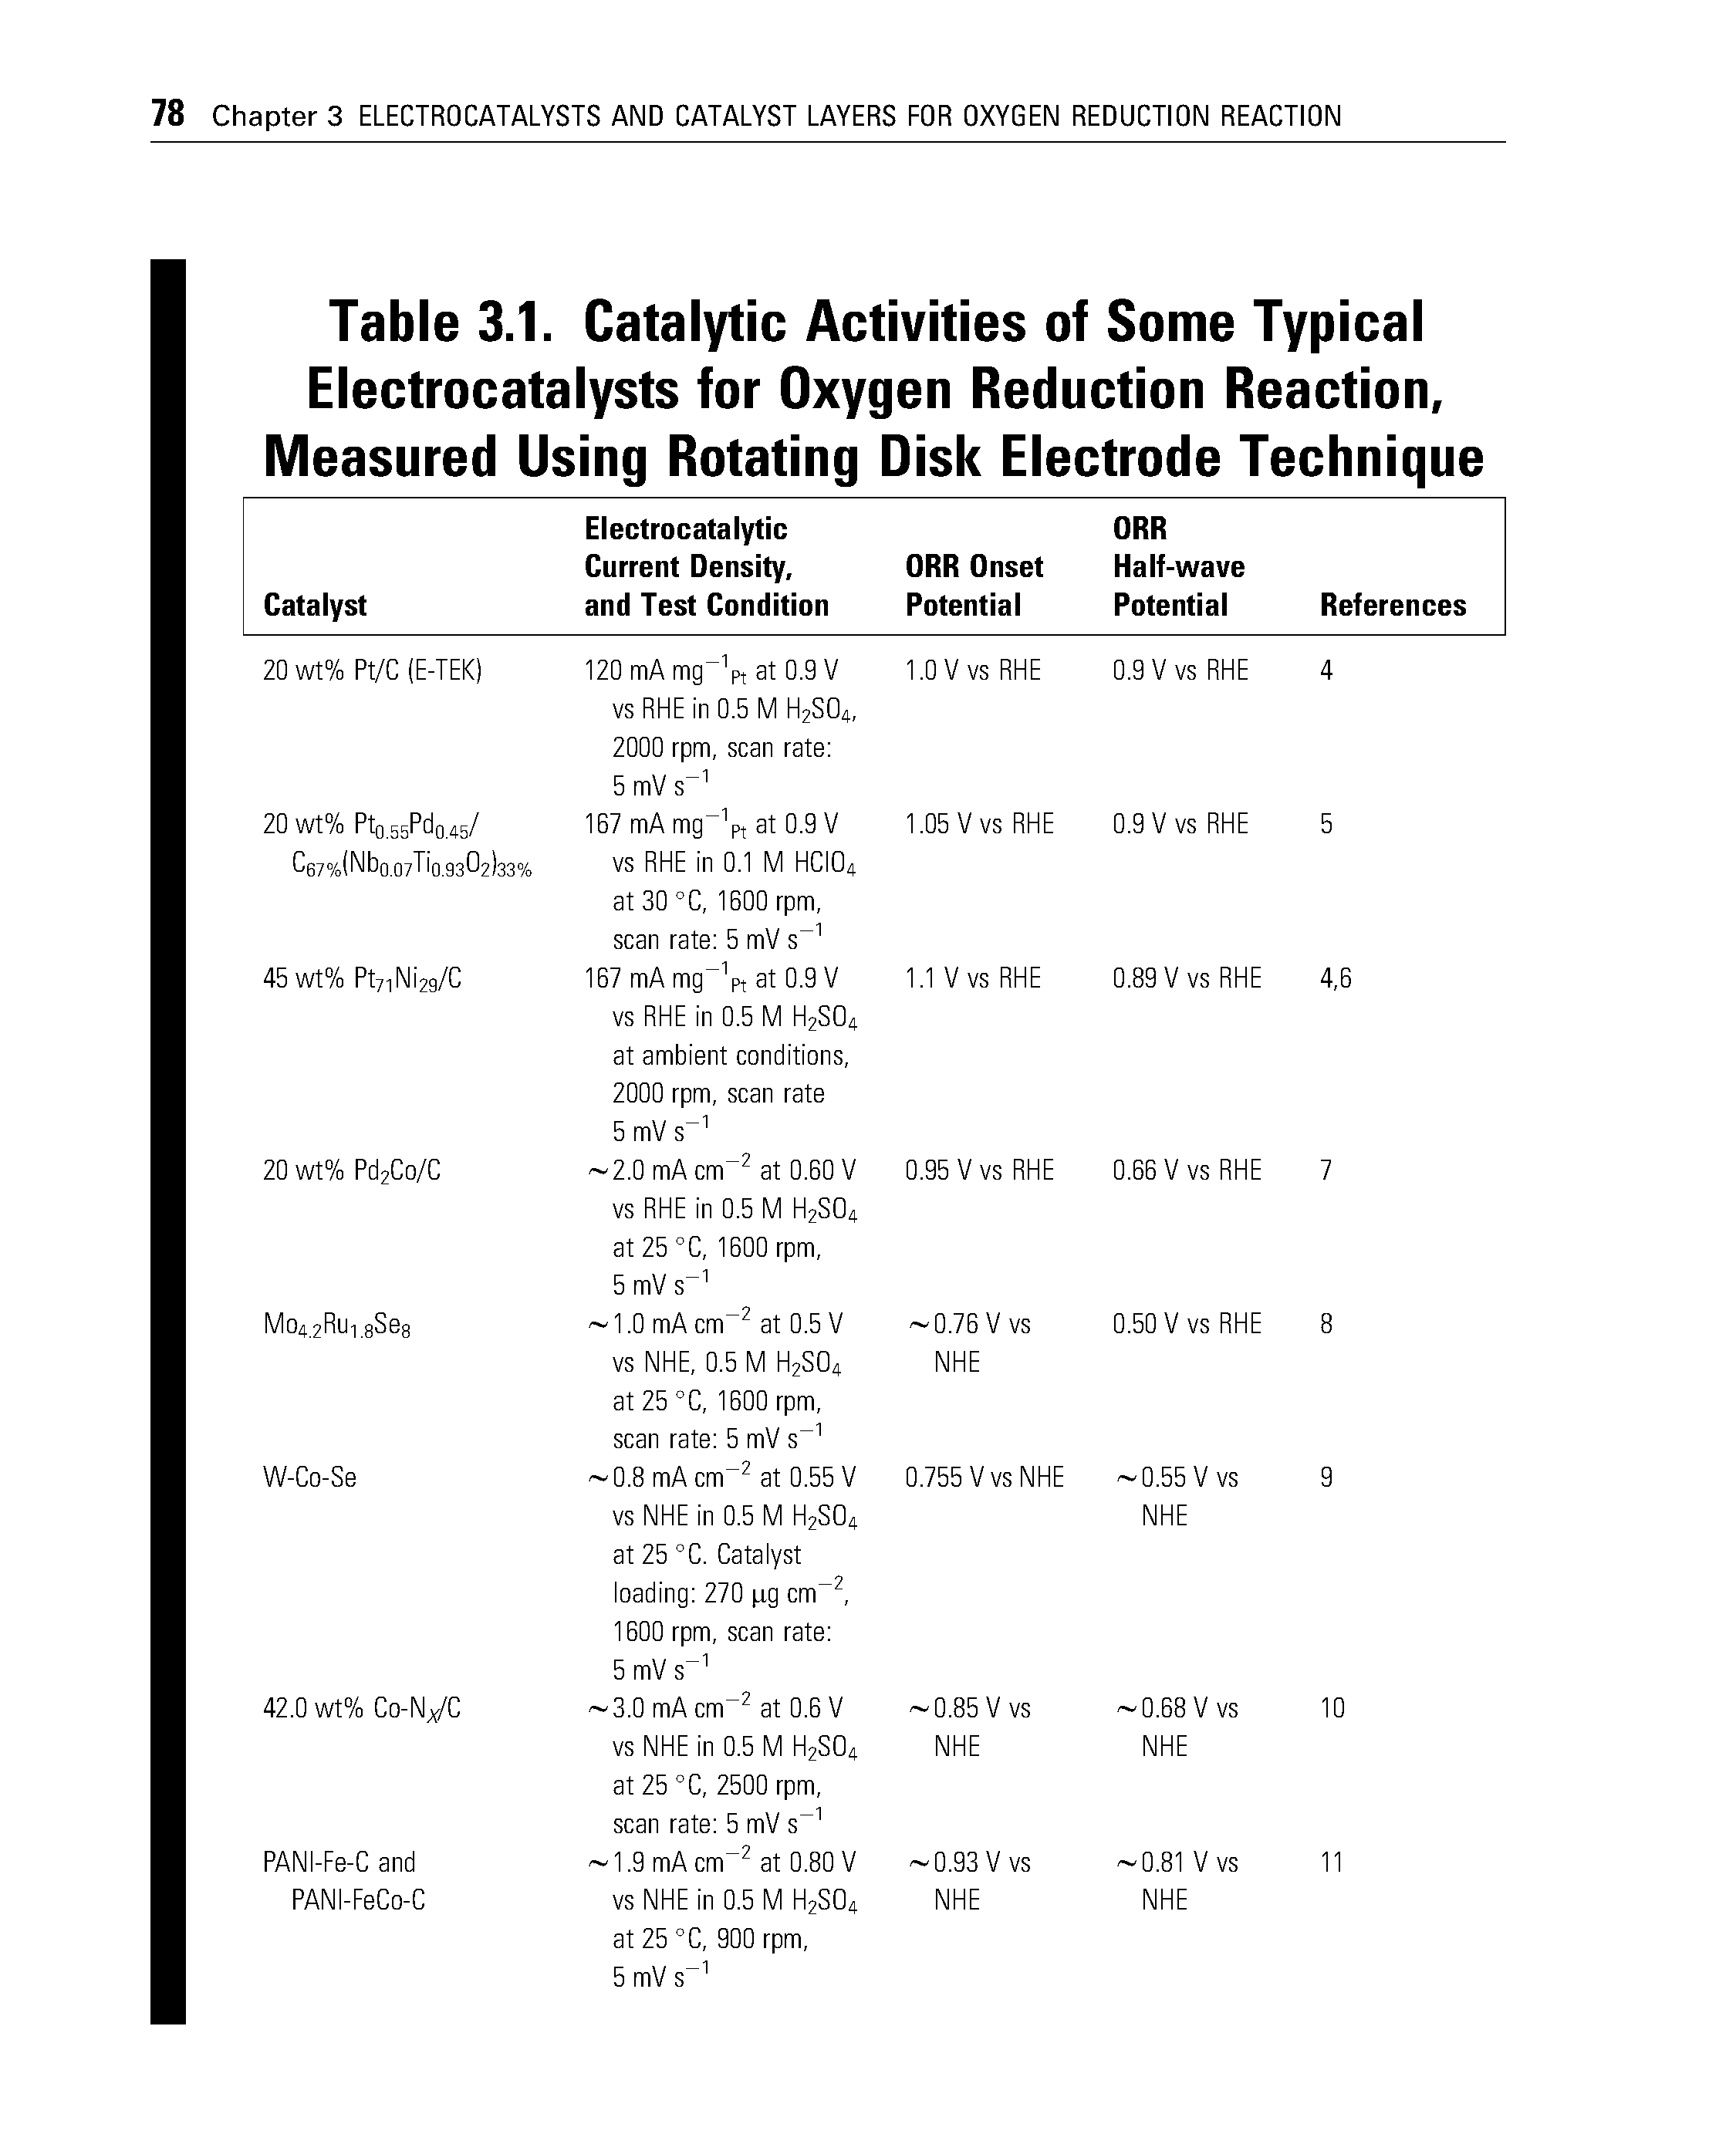 Table 3.1. Catalytic Activities of Some Typical Electrocatalysts for Oxygen Reduction Reaction, Measured Using Rotating Disk Electrode Technique...